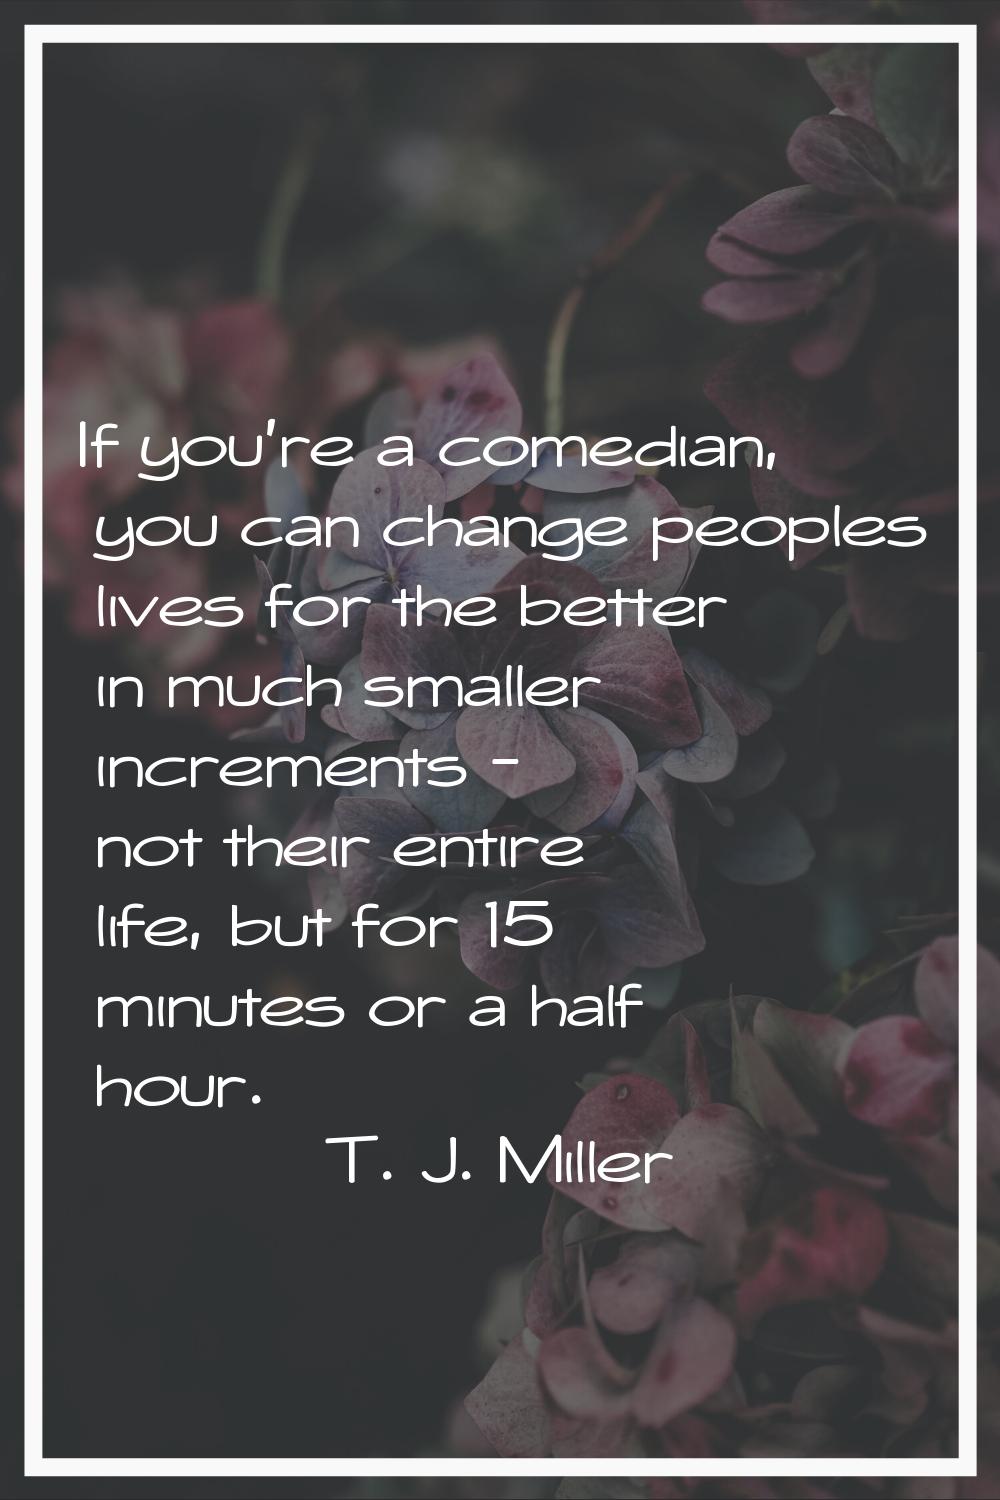 If you're a comedian, you can change peoples lives for the better in much smaller increments - not 